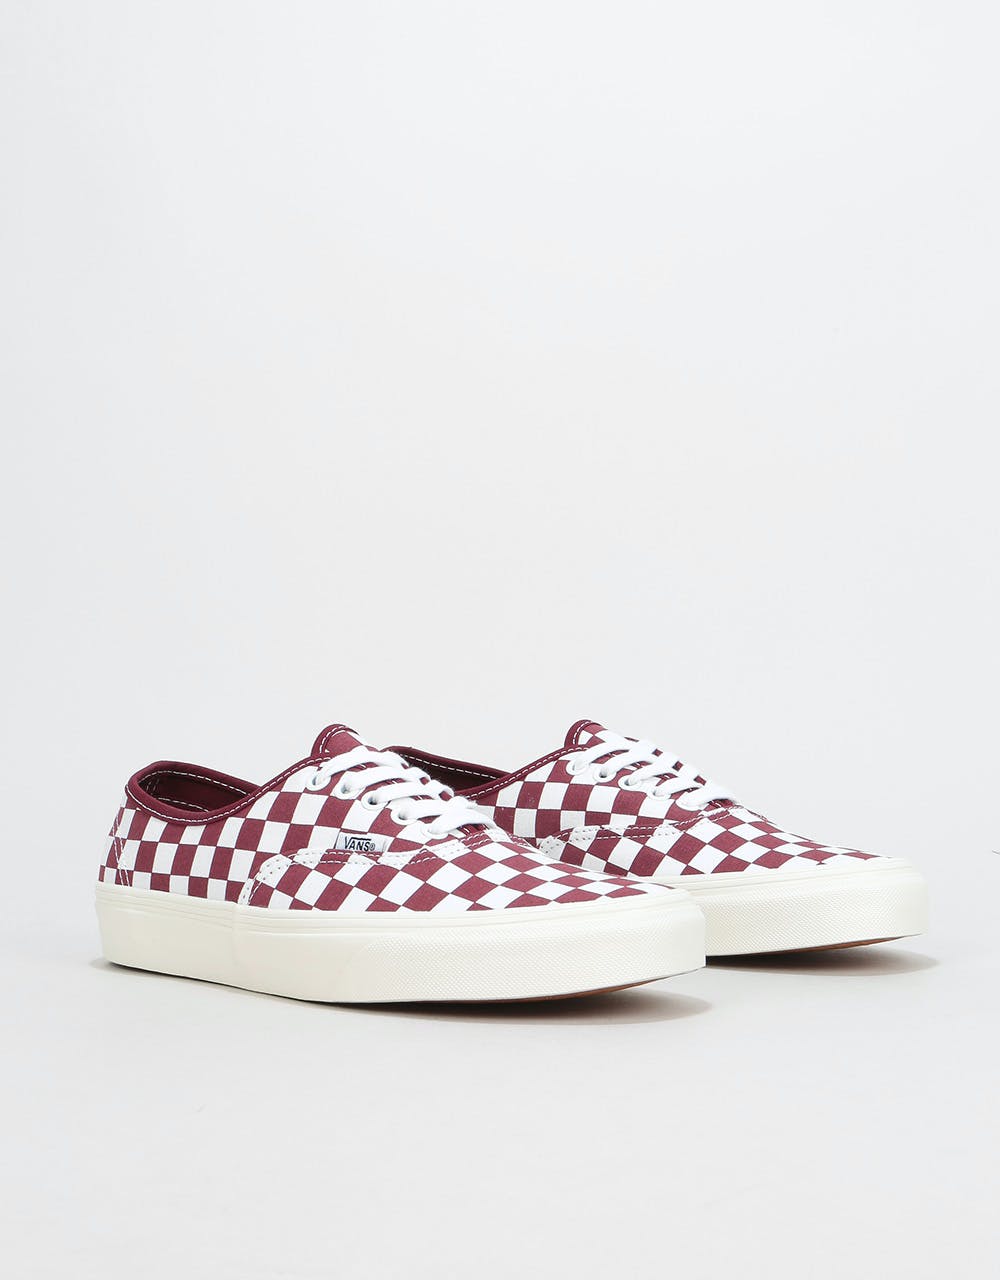 Vans Authentic Skate Shoes - (Checkerboard) Port Royale/Marshmallow